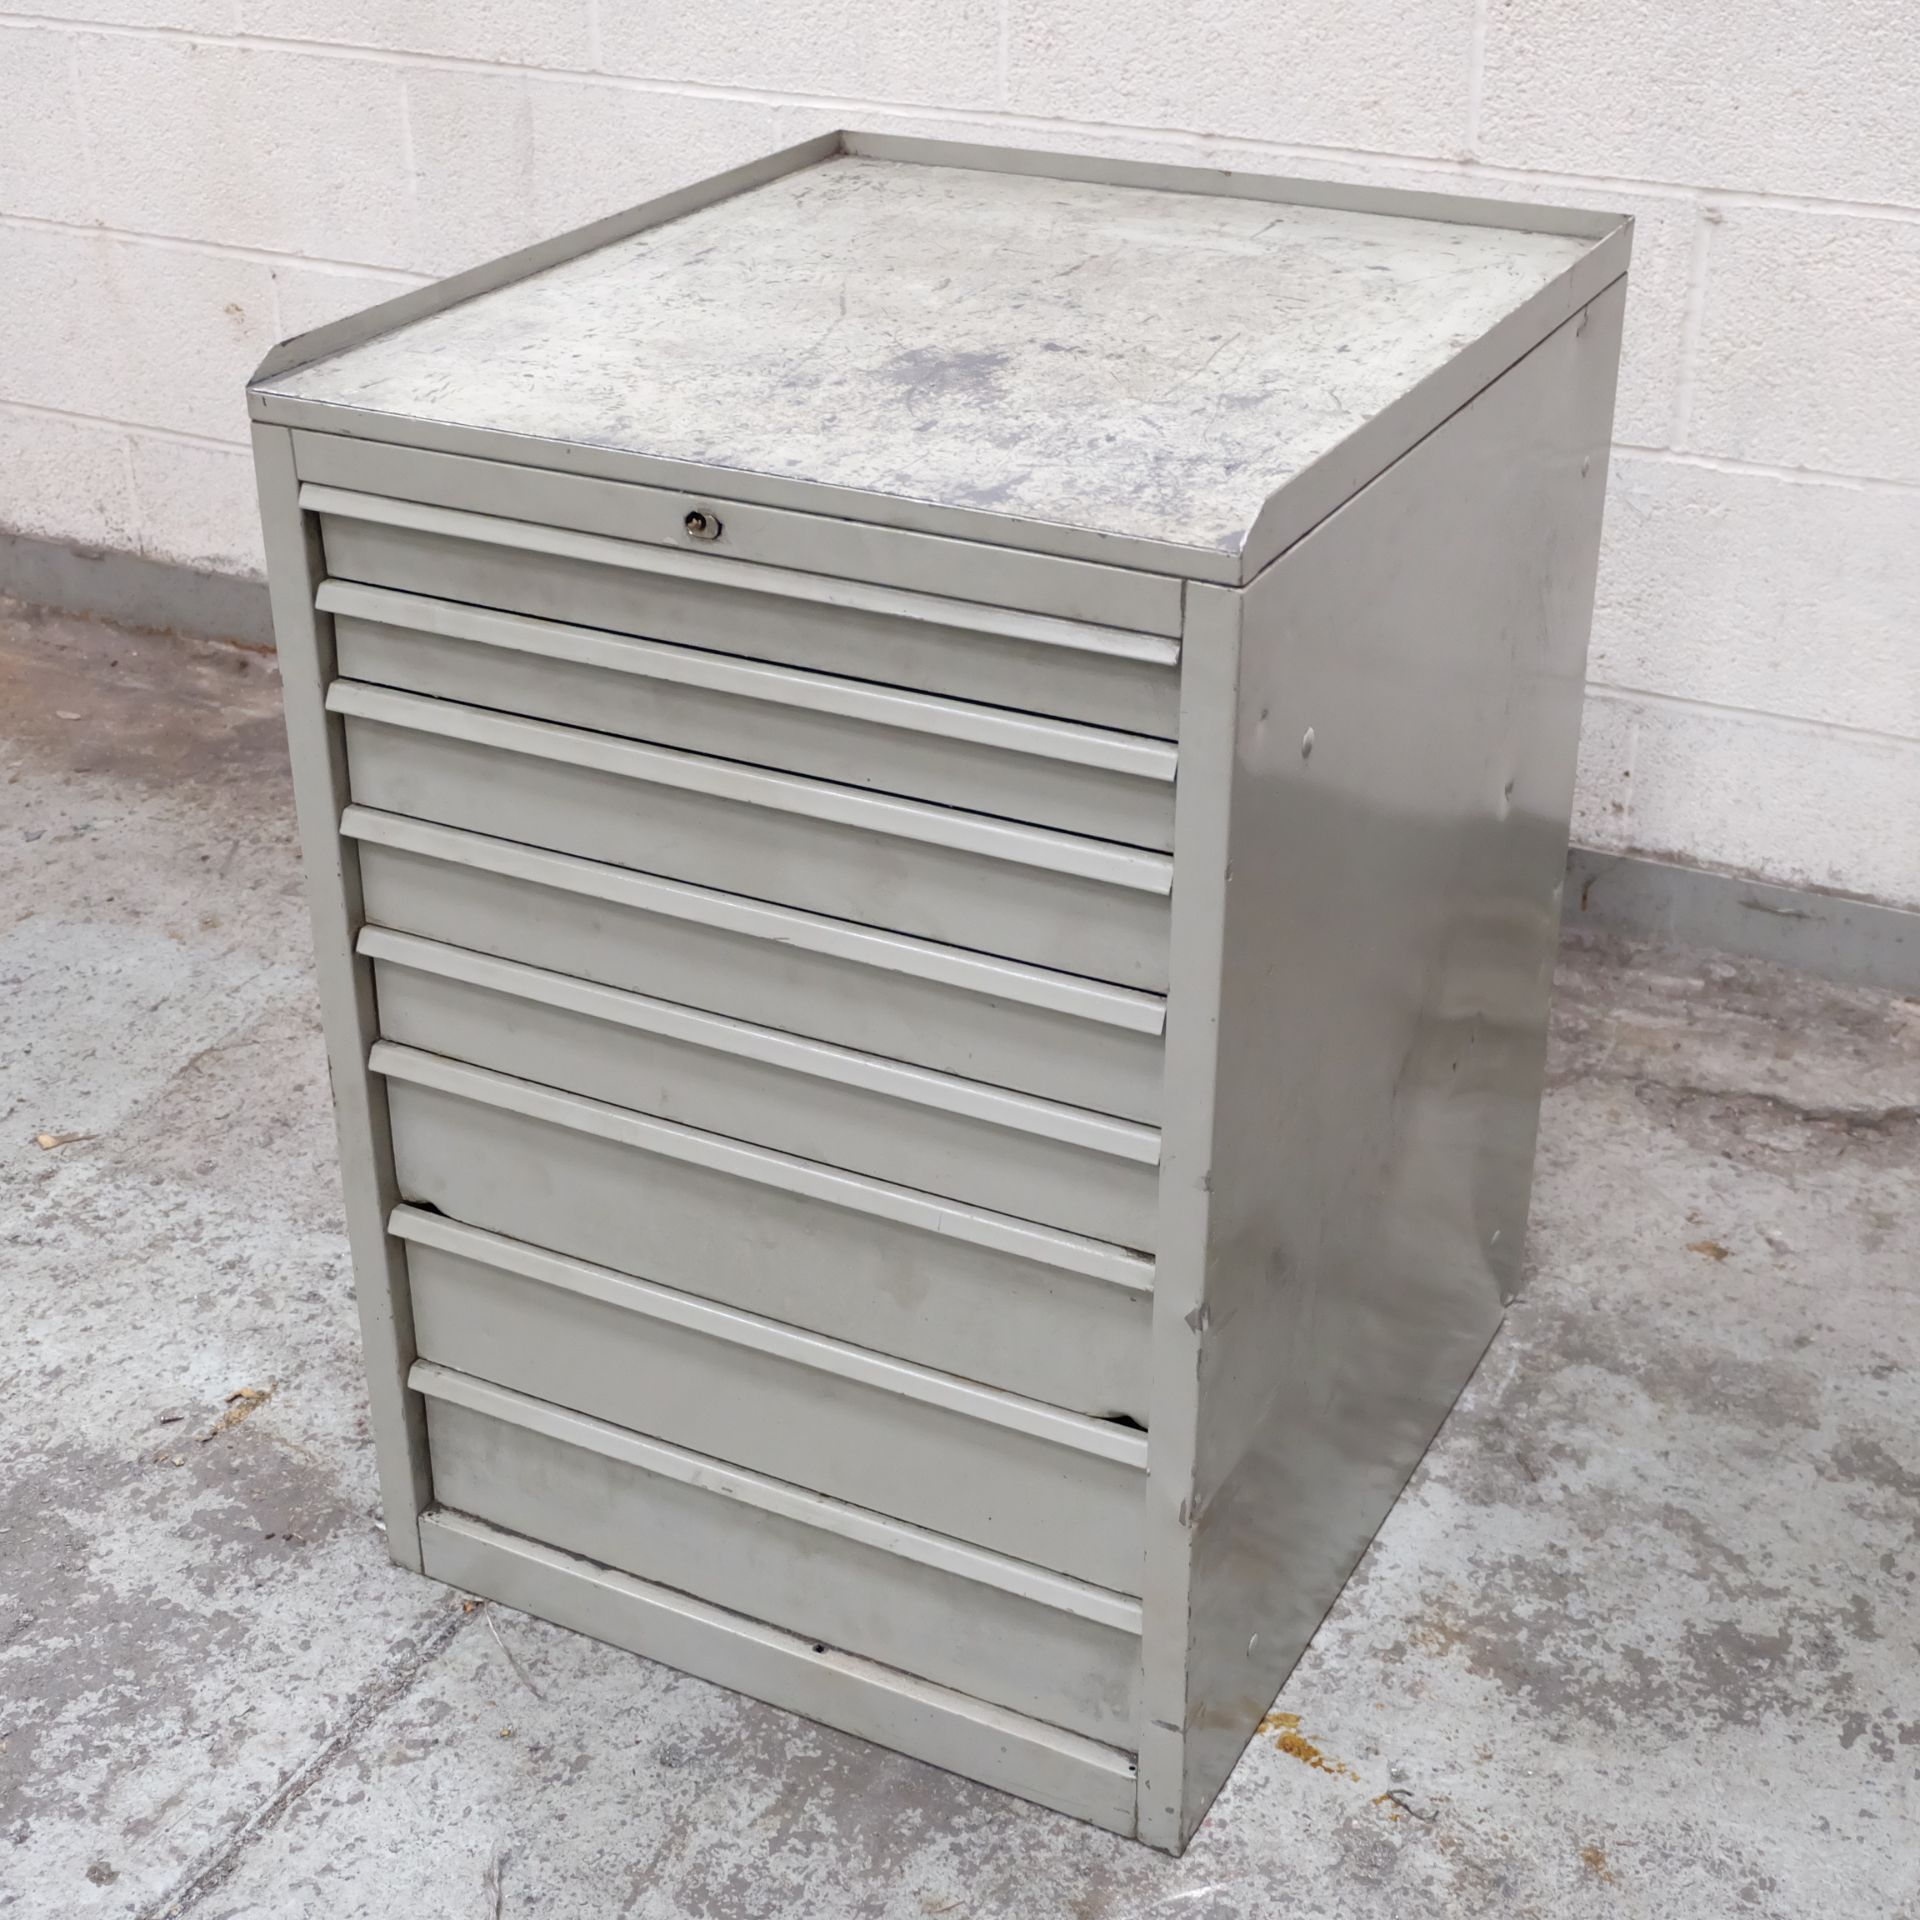 An 8 Drawer Tool Chest, 590mm x 660mm x 820mm High - Image 2 of 6